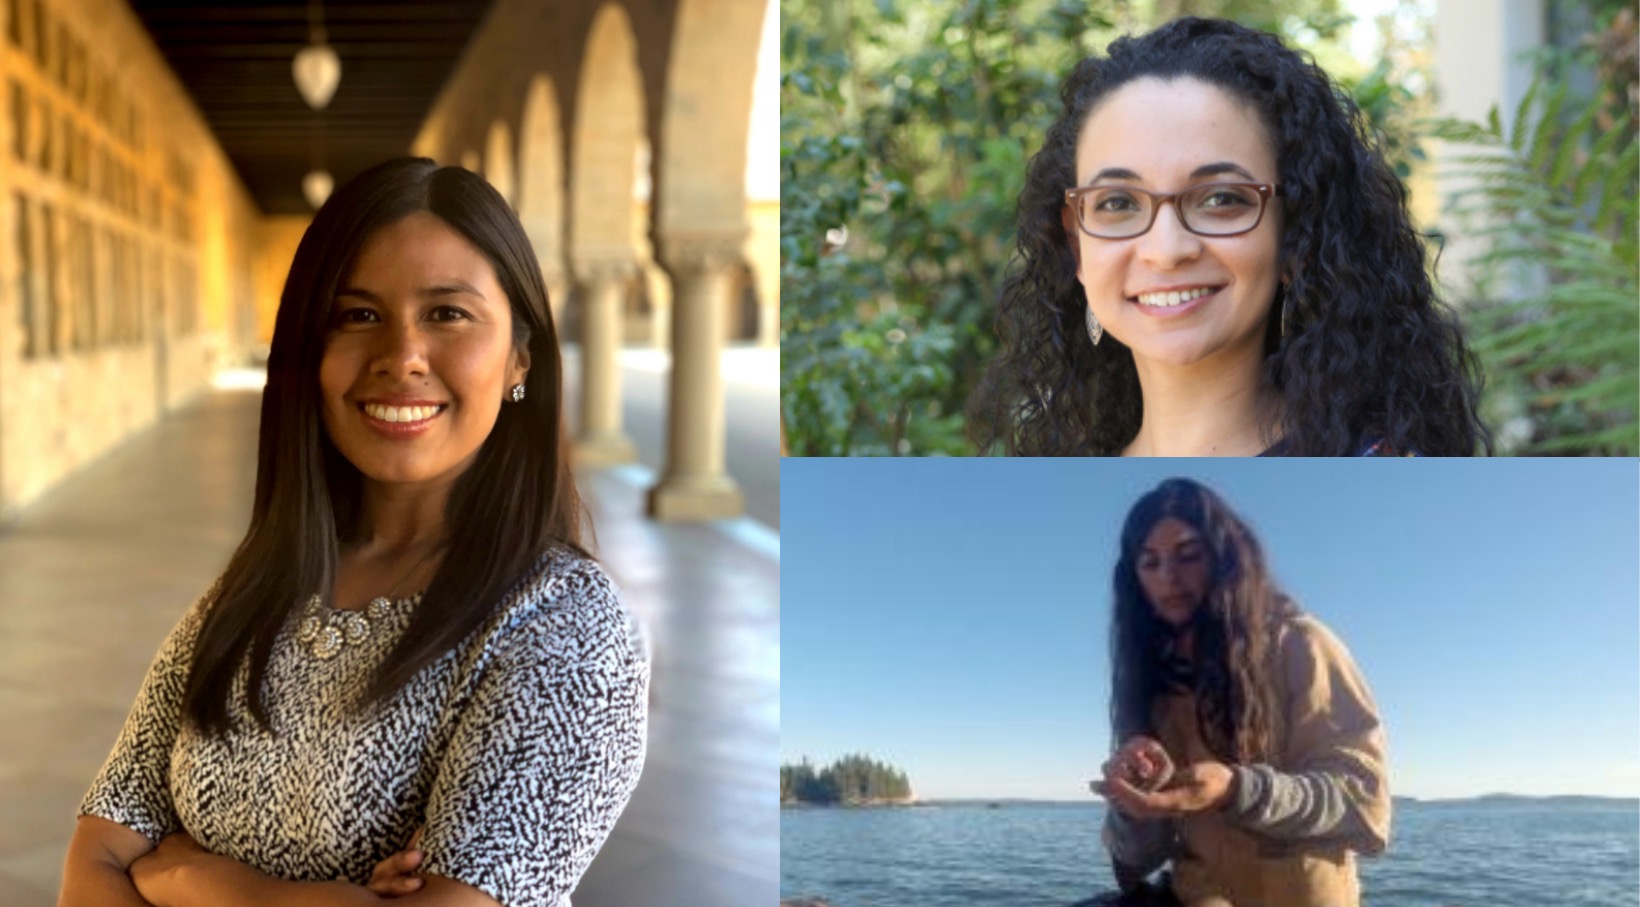 Scripps College's Racial Justice and Equity faculty fellows Melissa Mesinas, Maryan Soliman, and Jasmin Baetz